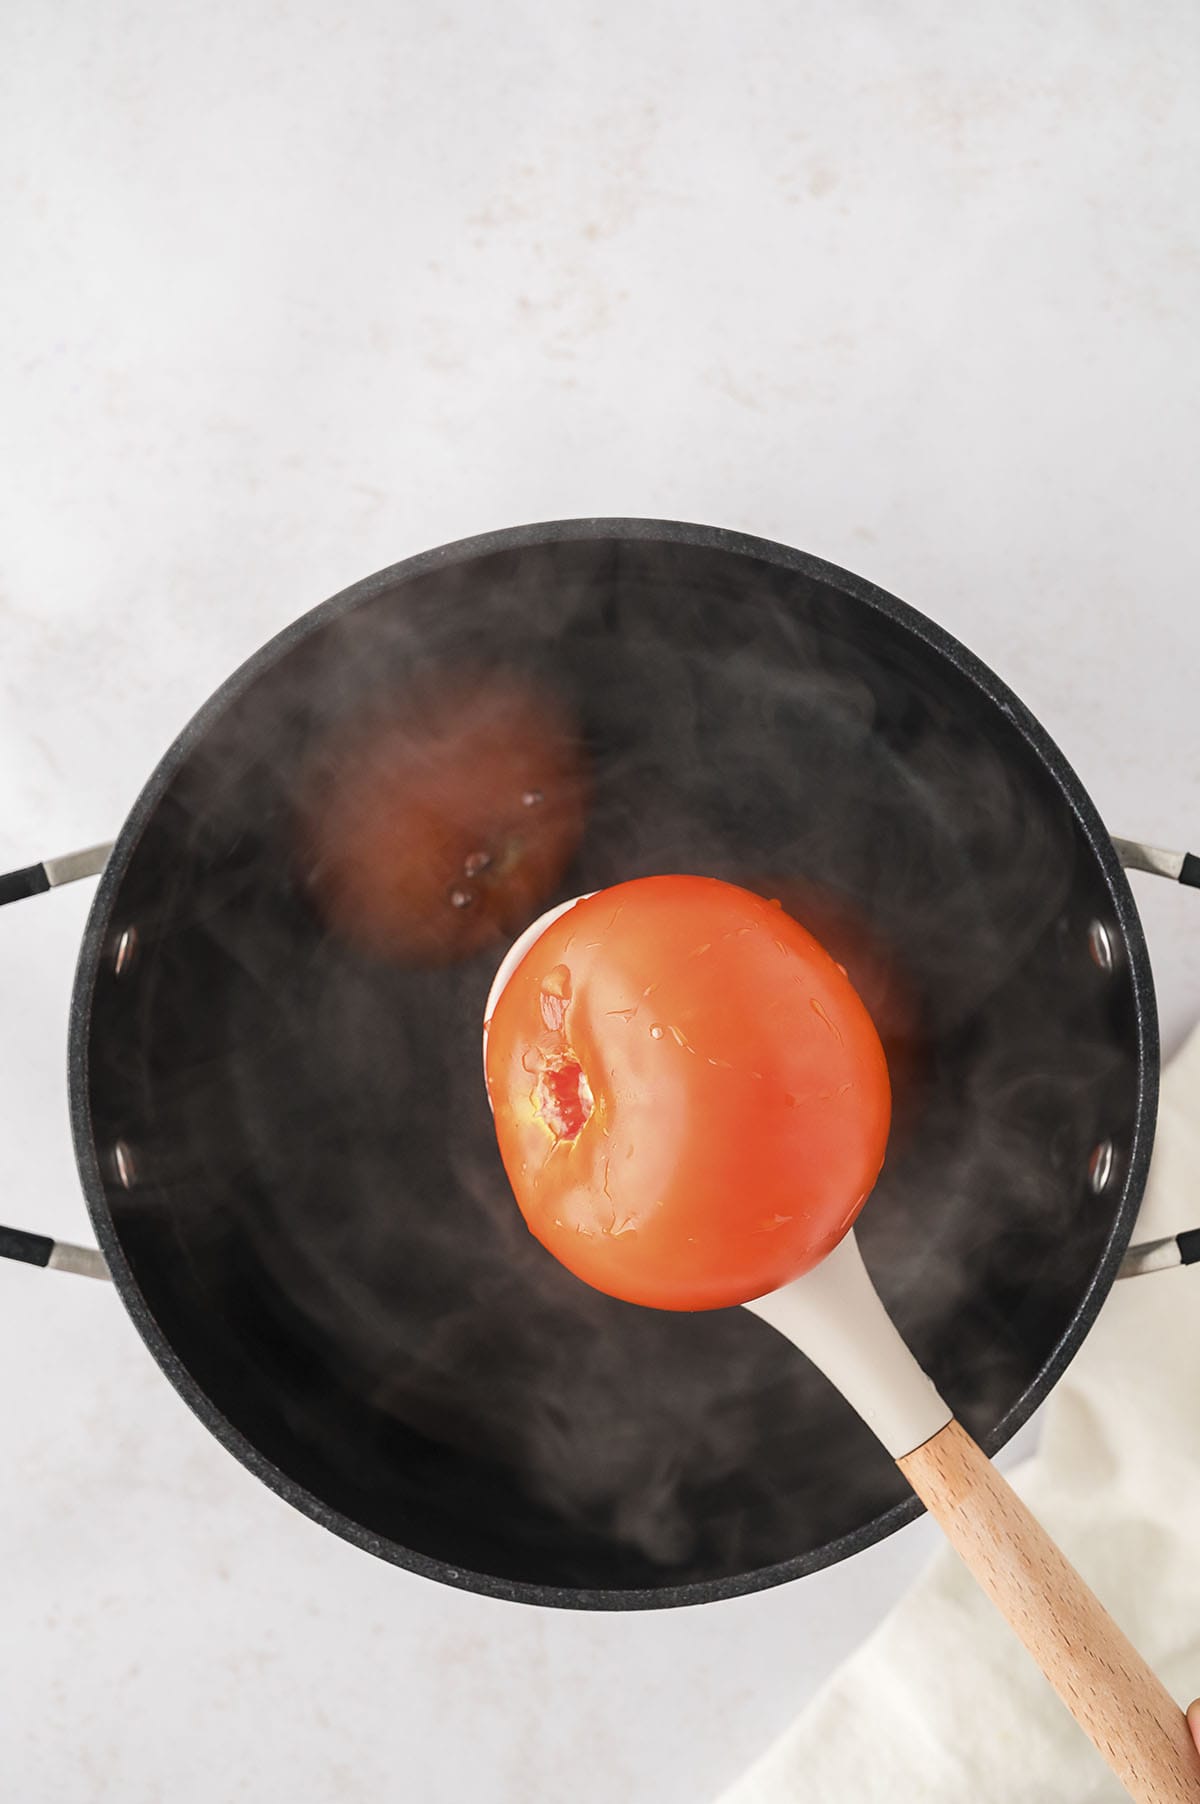 Tomato in boiling water.